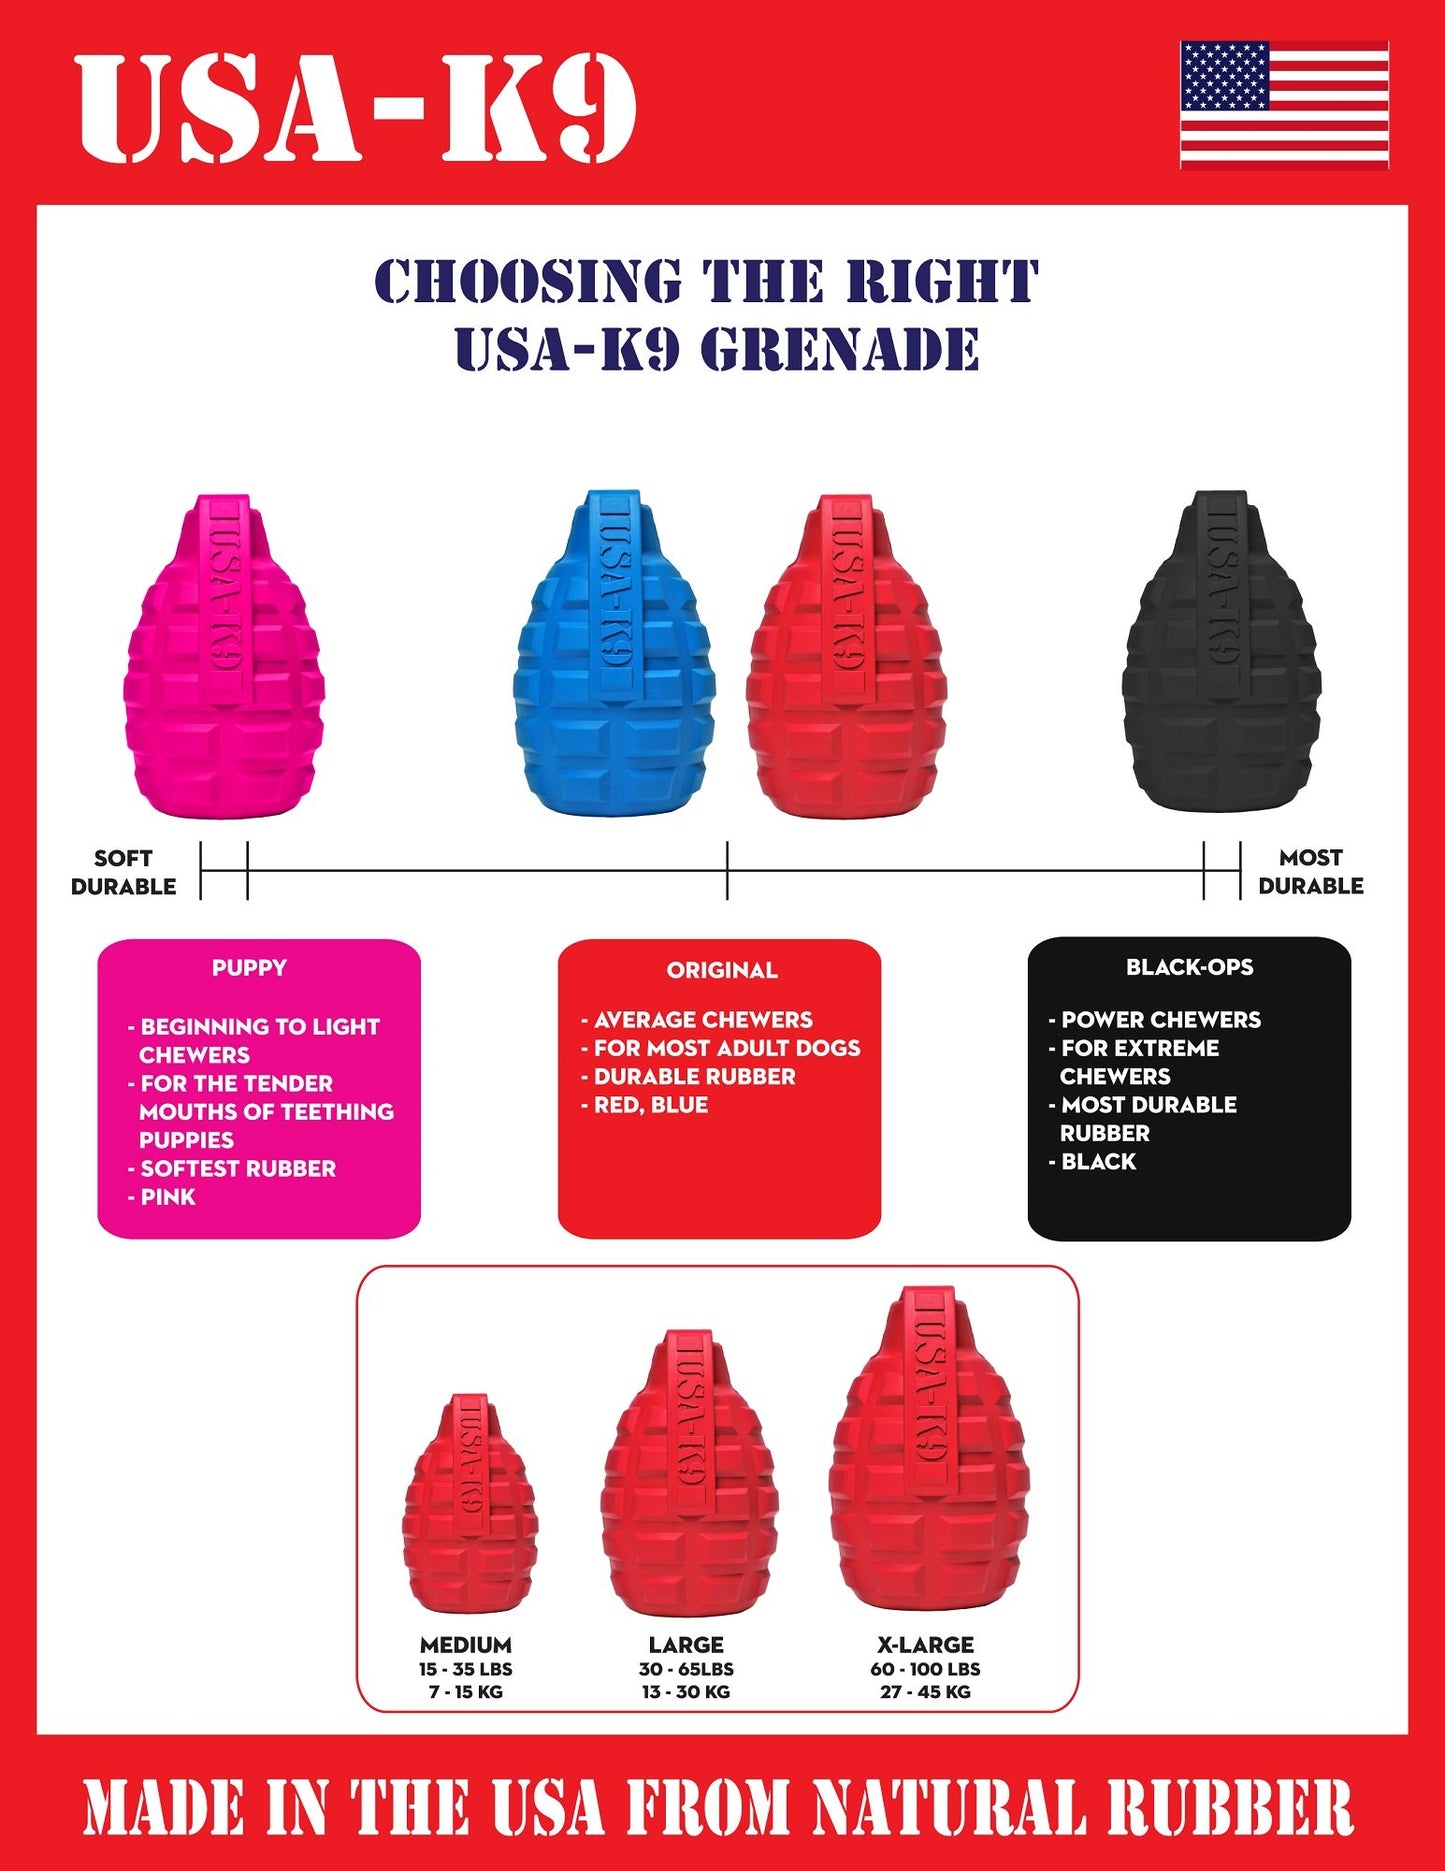 The Your Whole Dog Soda Pup GRENADE TOY & TREAT DISPENSER (M&L) are durable chew toys shown in different colors.